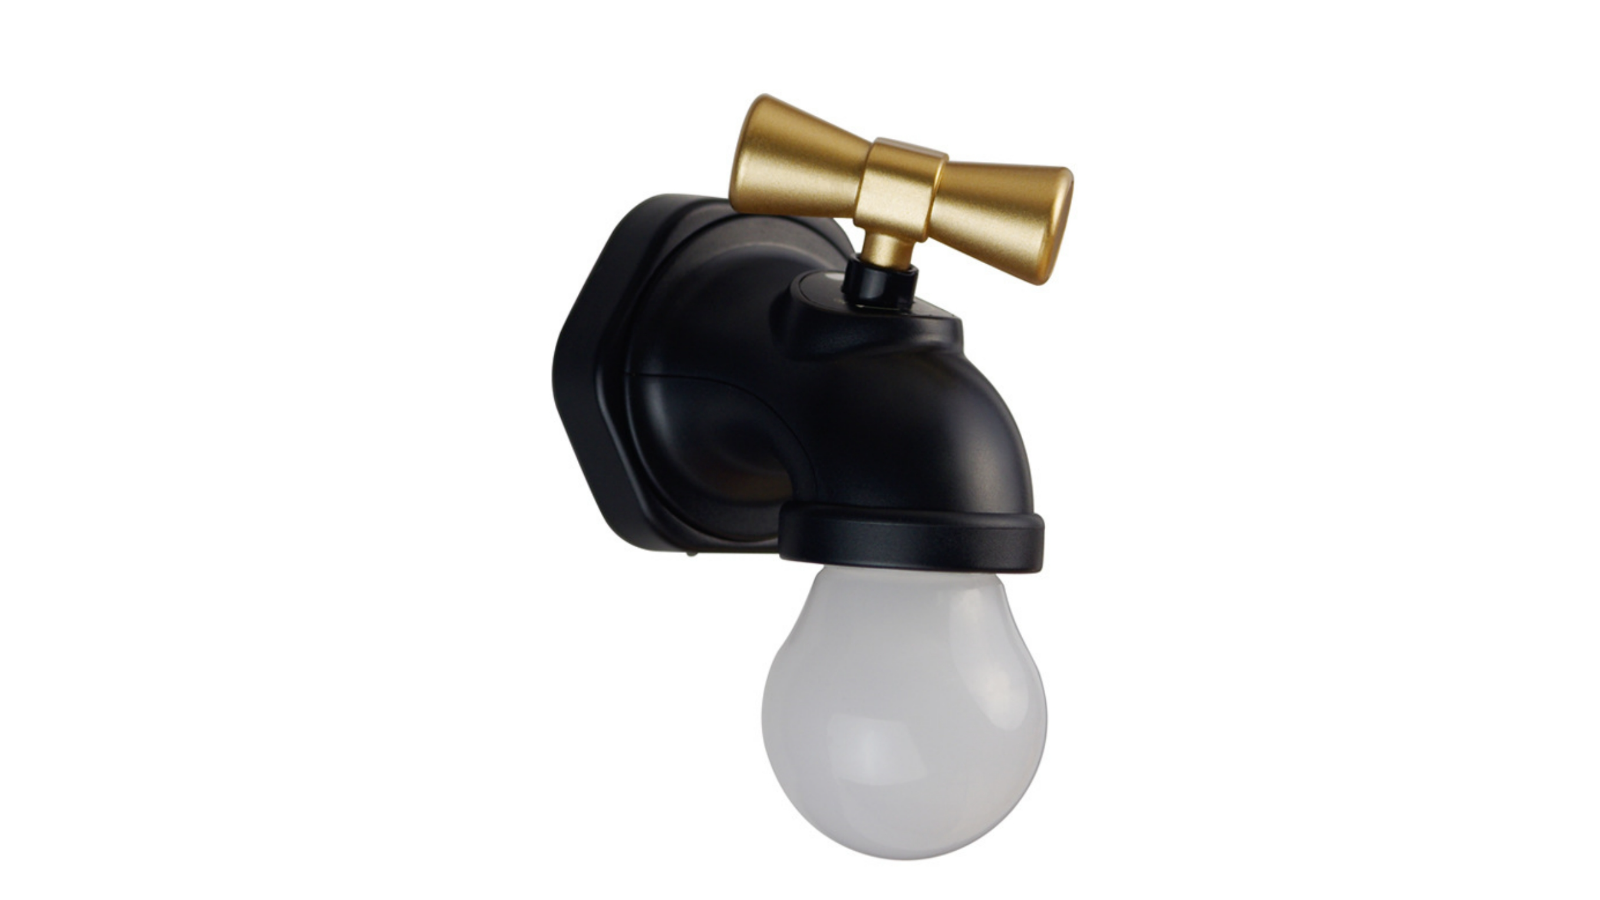 Moody Mouse Smart Faucet Night Light: Elegance Illuminated for Your Space